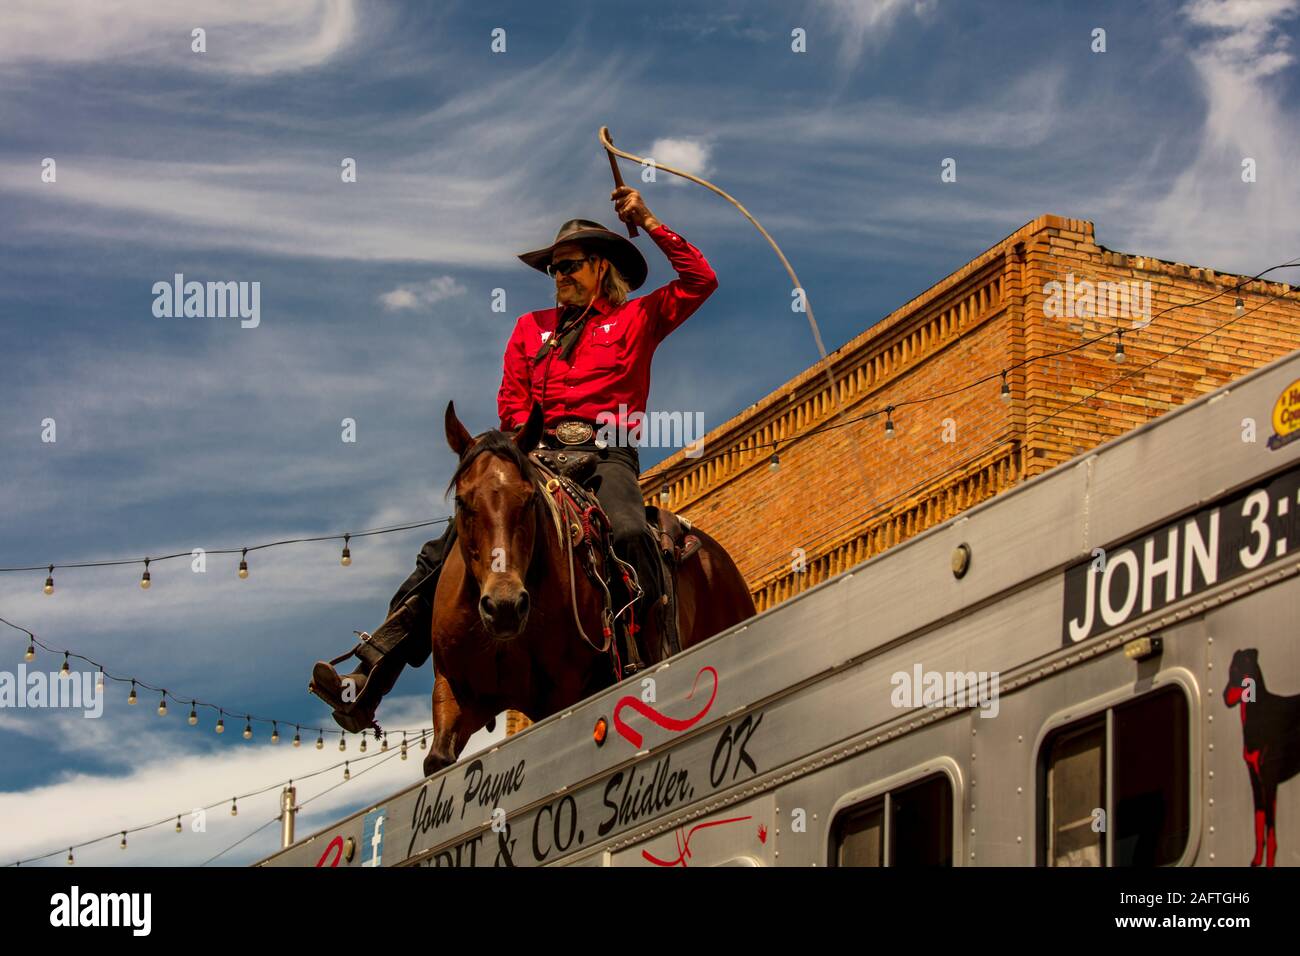 AUGUST 10, 2019 - Gallup, New Mexico, USA - John Payne Rodeo Rider bei 98Th Gallup Inter-tribal Indian Ceremonial, New Mexico Stockfoto